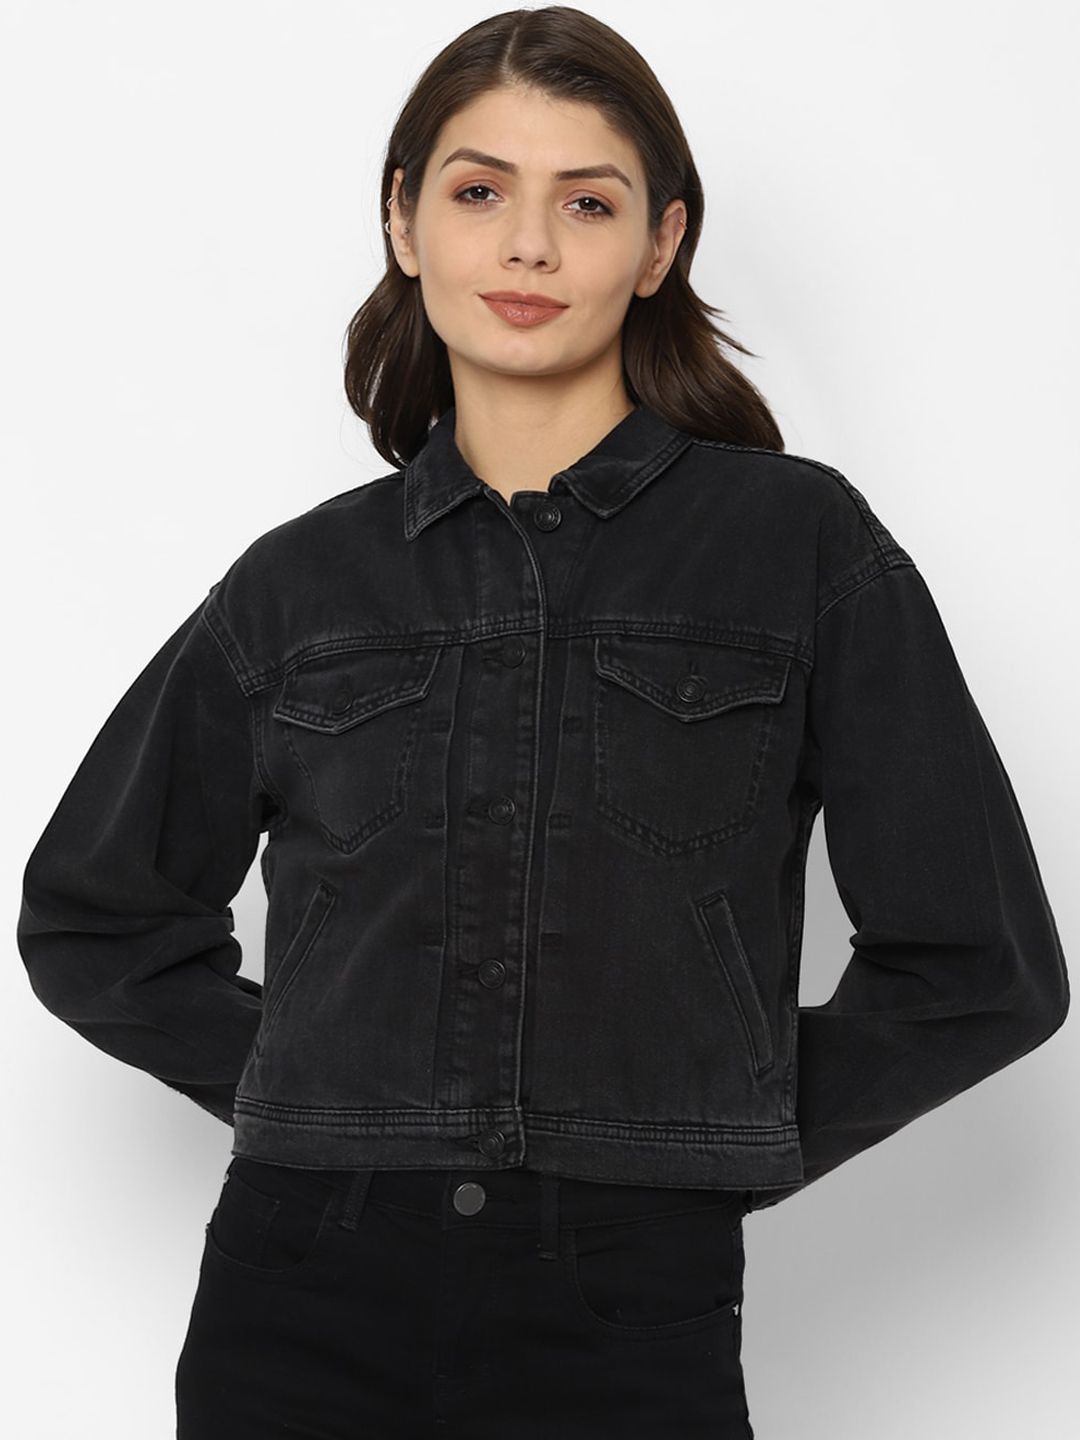 AMERICAN EAGLE OUTFITTERS Women Black Solid Denim Jacket Price in India